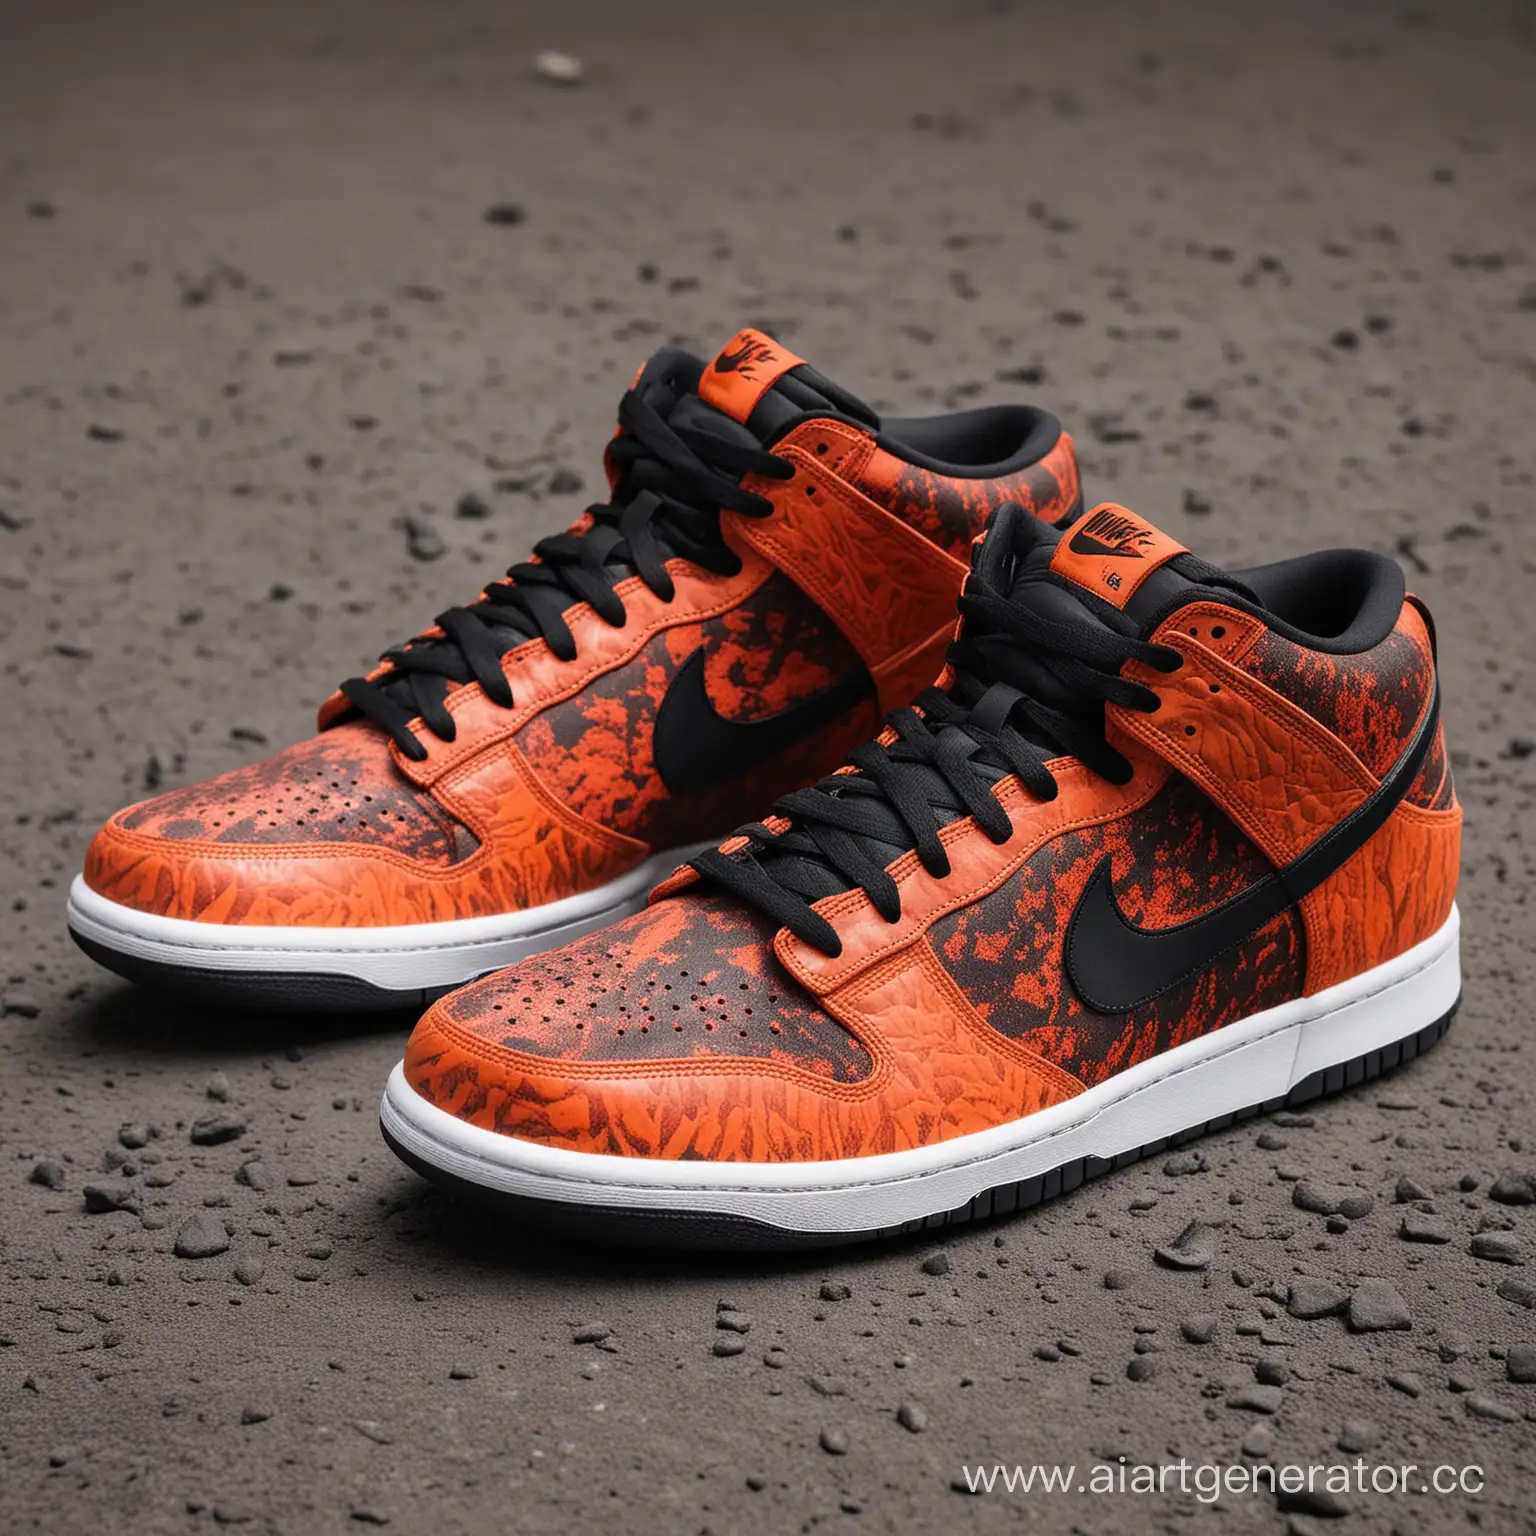 Nike-Dunk-Sneakers-with-Volcanic-Eruption-and-Lava-Texture-Pattern